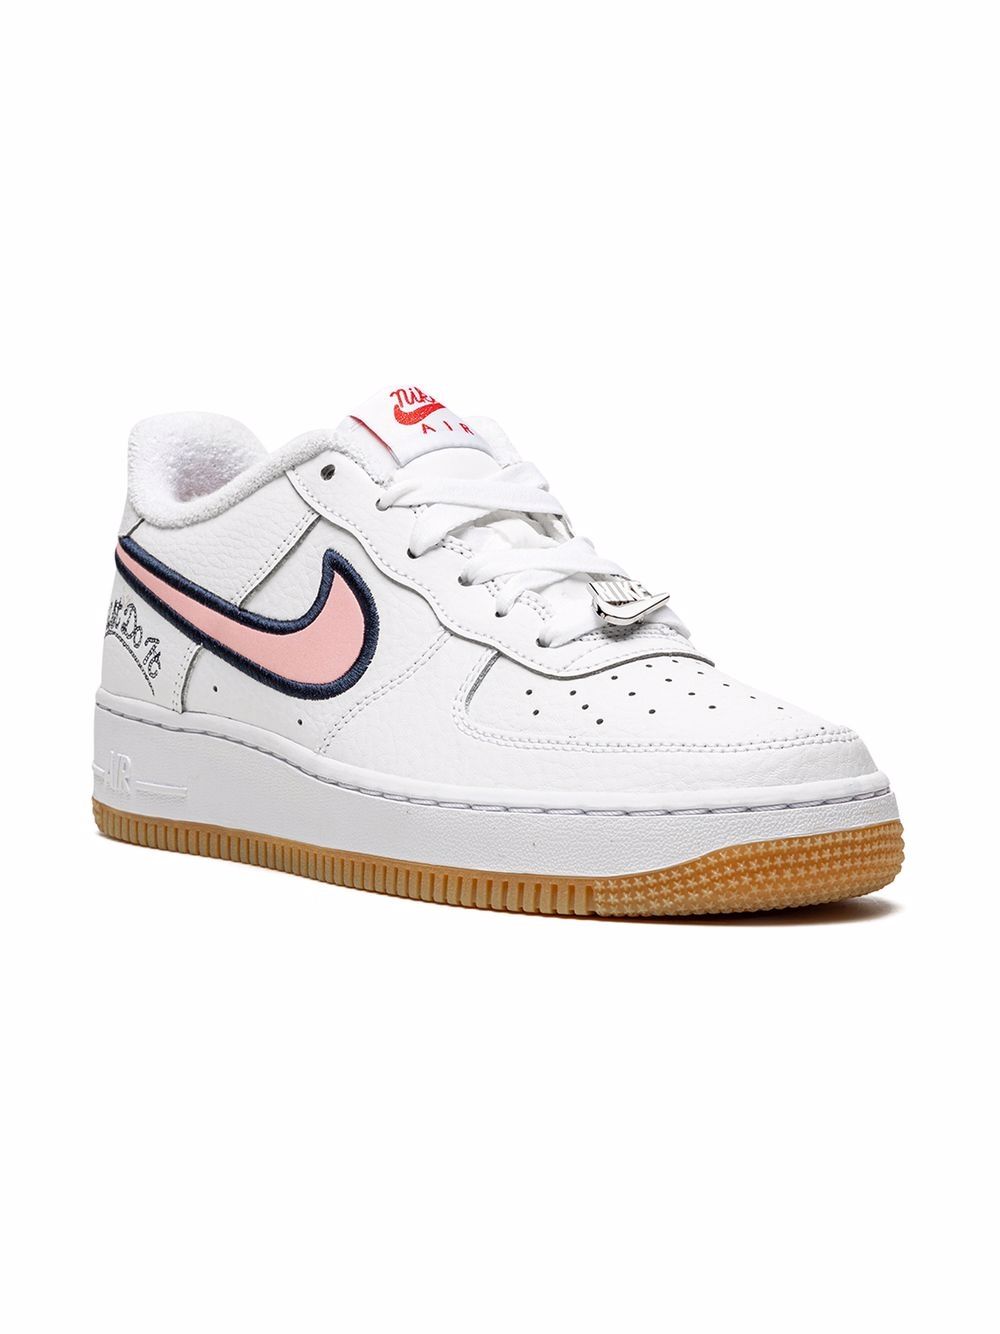 Nike Kids Air Force 1 Lv8 "Just Do It - Pink Glaze" sneakers - White von Nike Kids